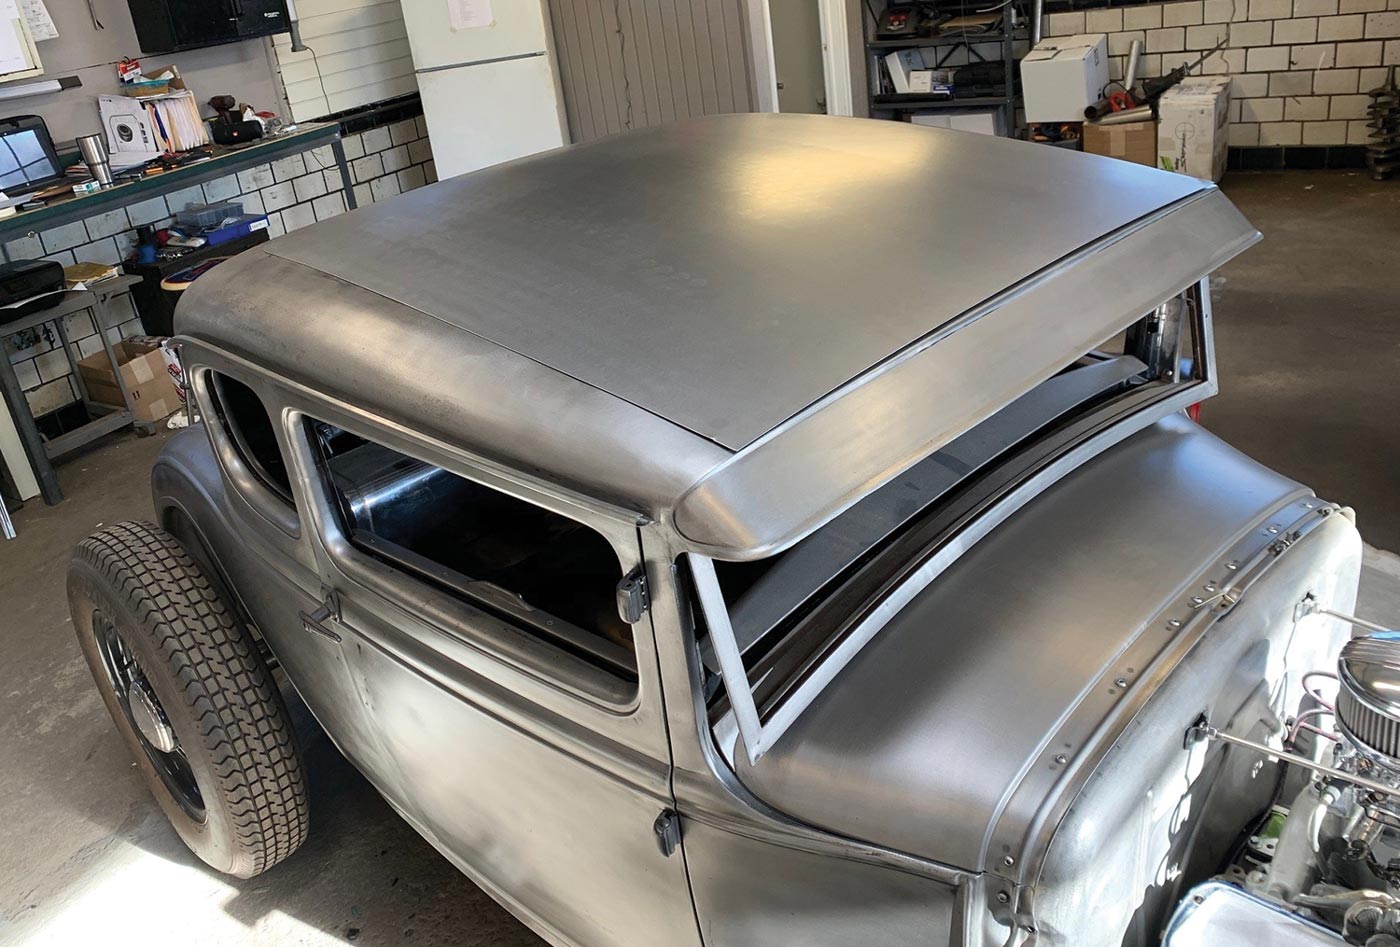 the new roof insert panel from Walden Speed Shop mocked on the coupe